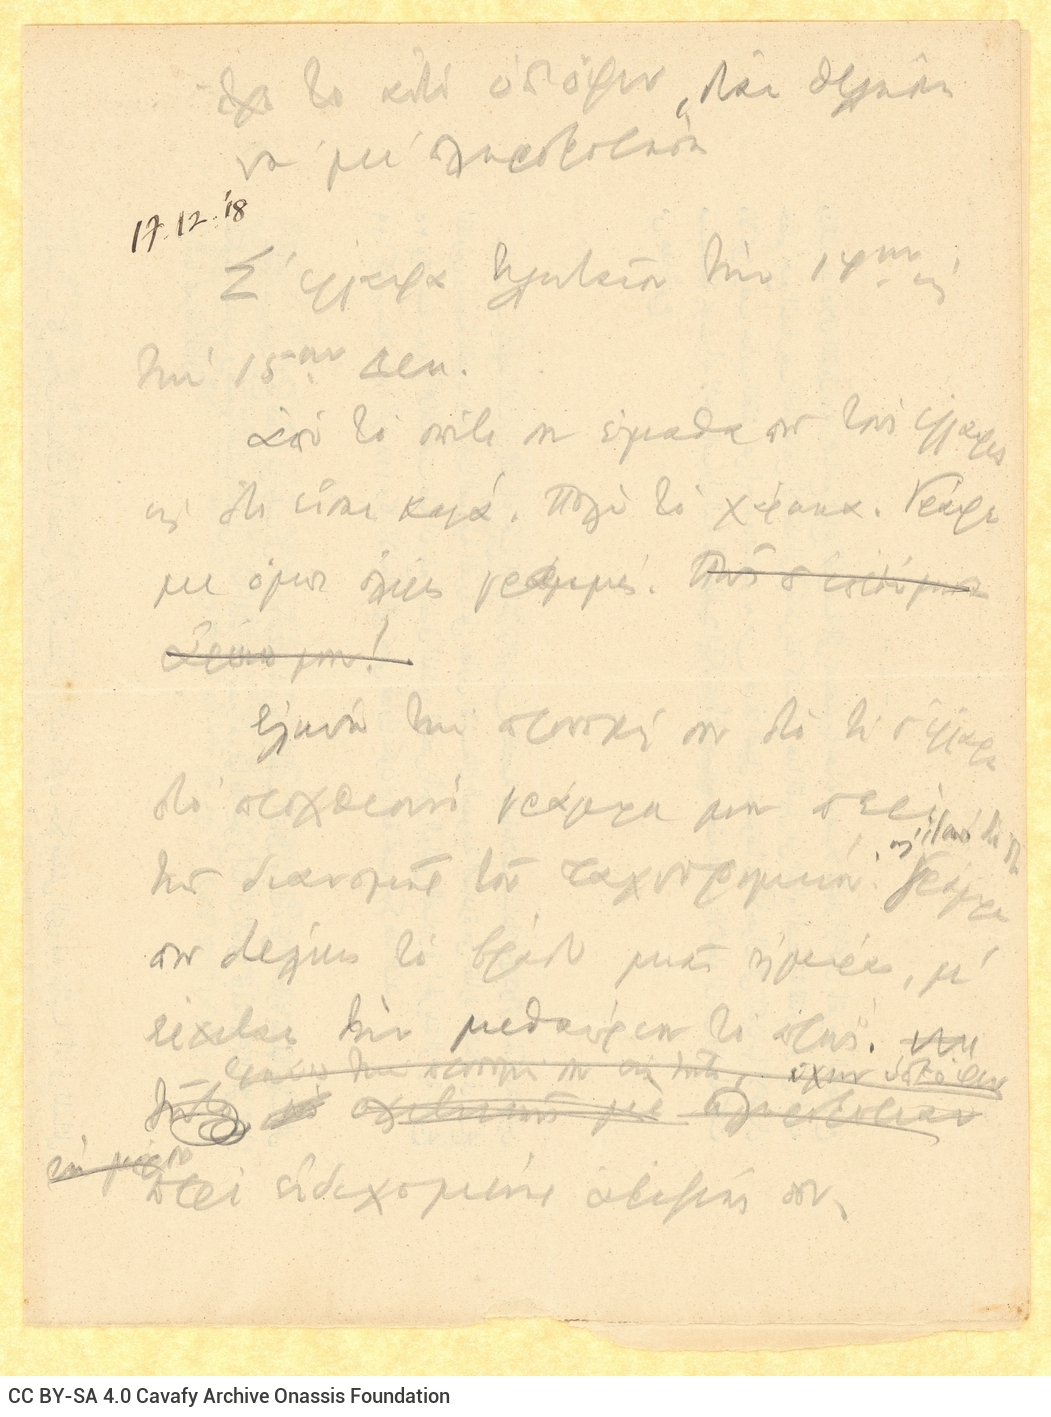 Handwritten draft letter by Cavafy to Alekos [Singopoulo] on the verso of a printed medium with text in Arabic. The poet revi